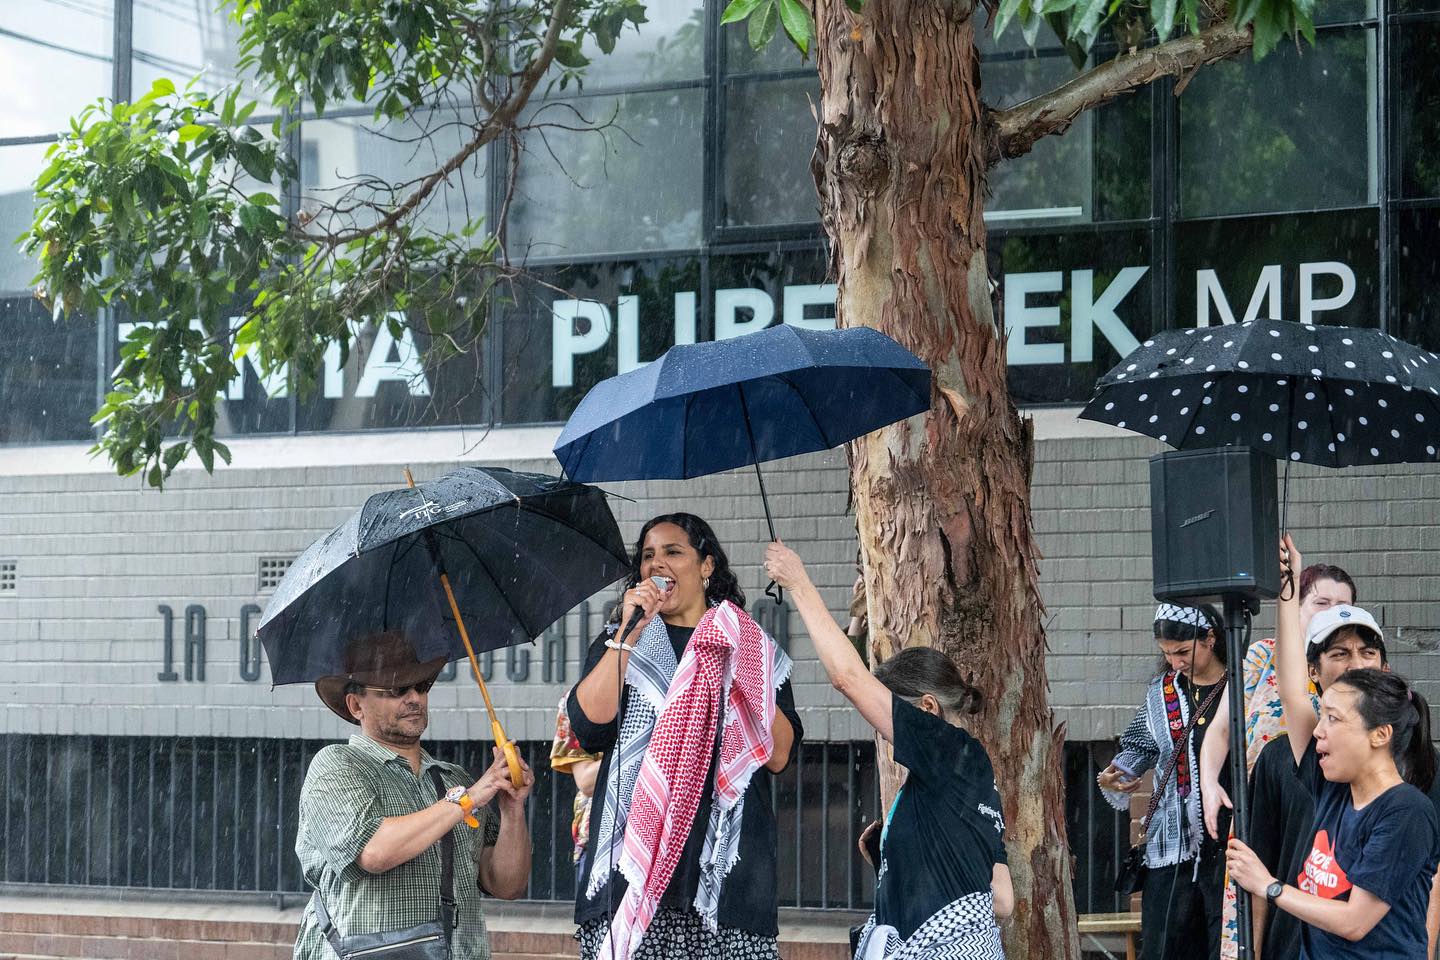 Heavy rain did not deter protesters from speaking out